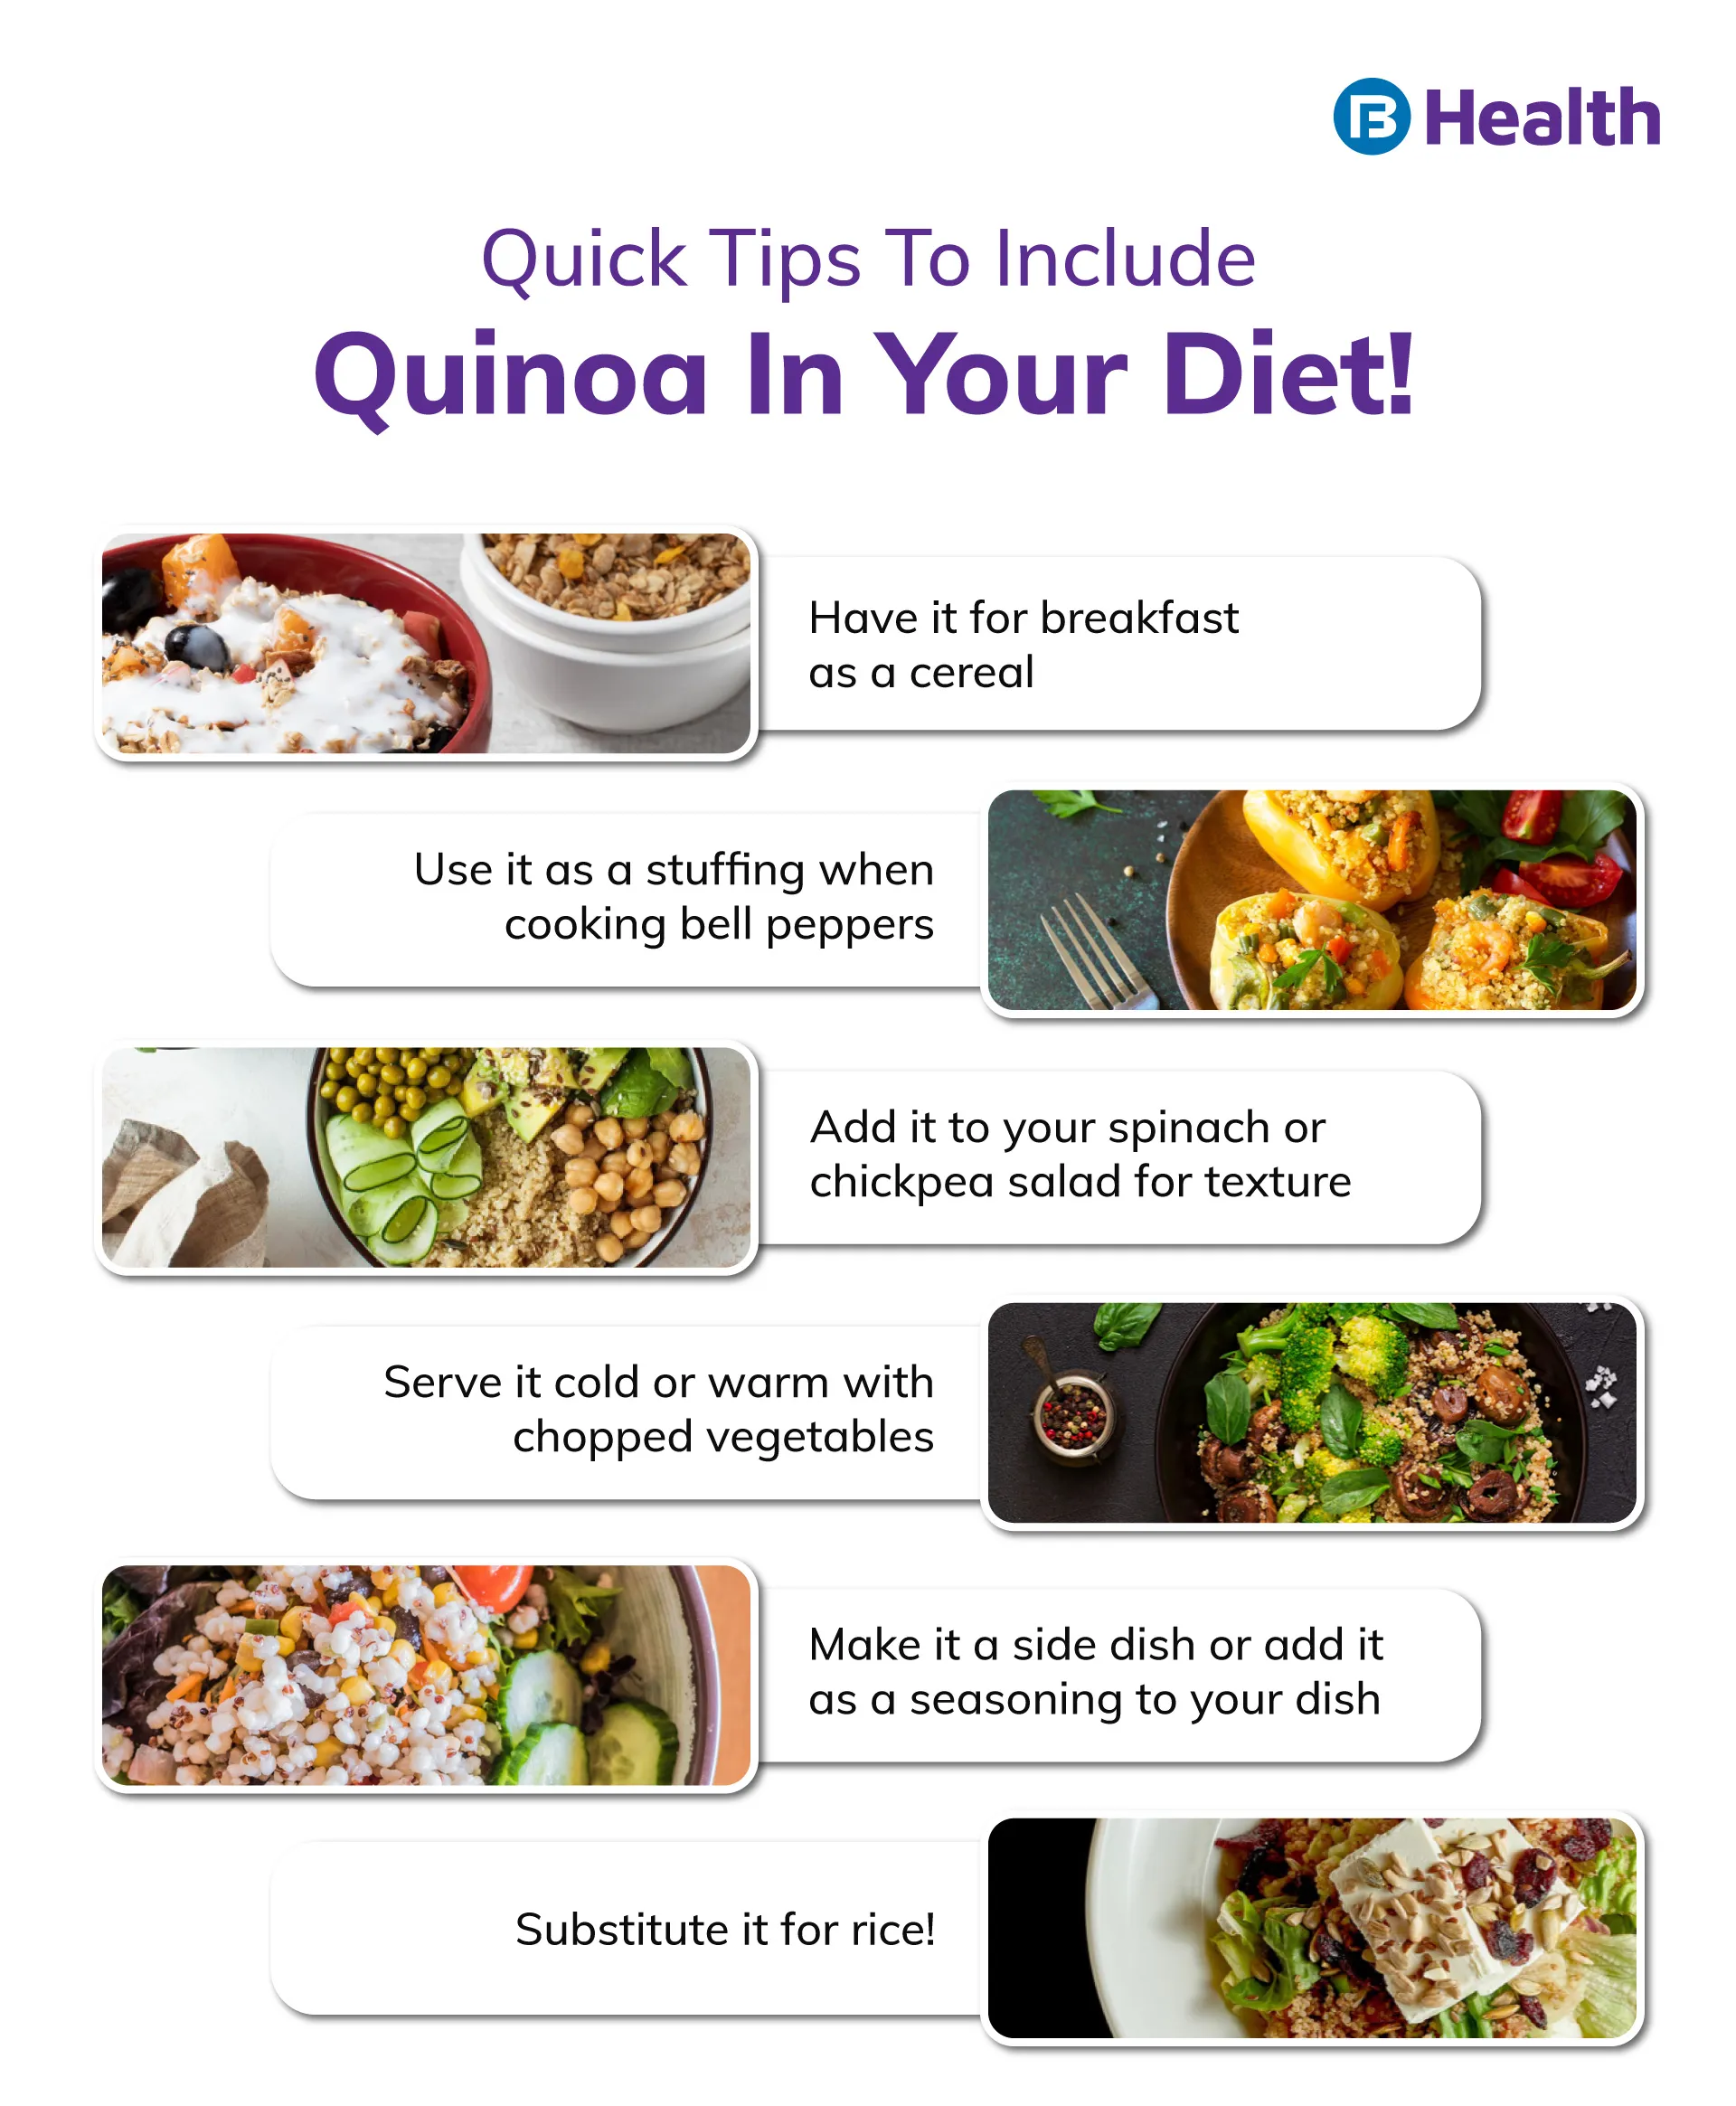 Quinoa - Everything We Need to Know